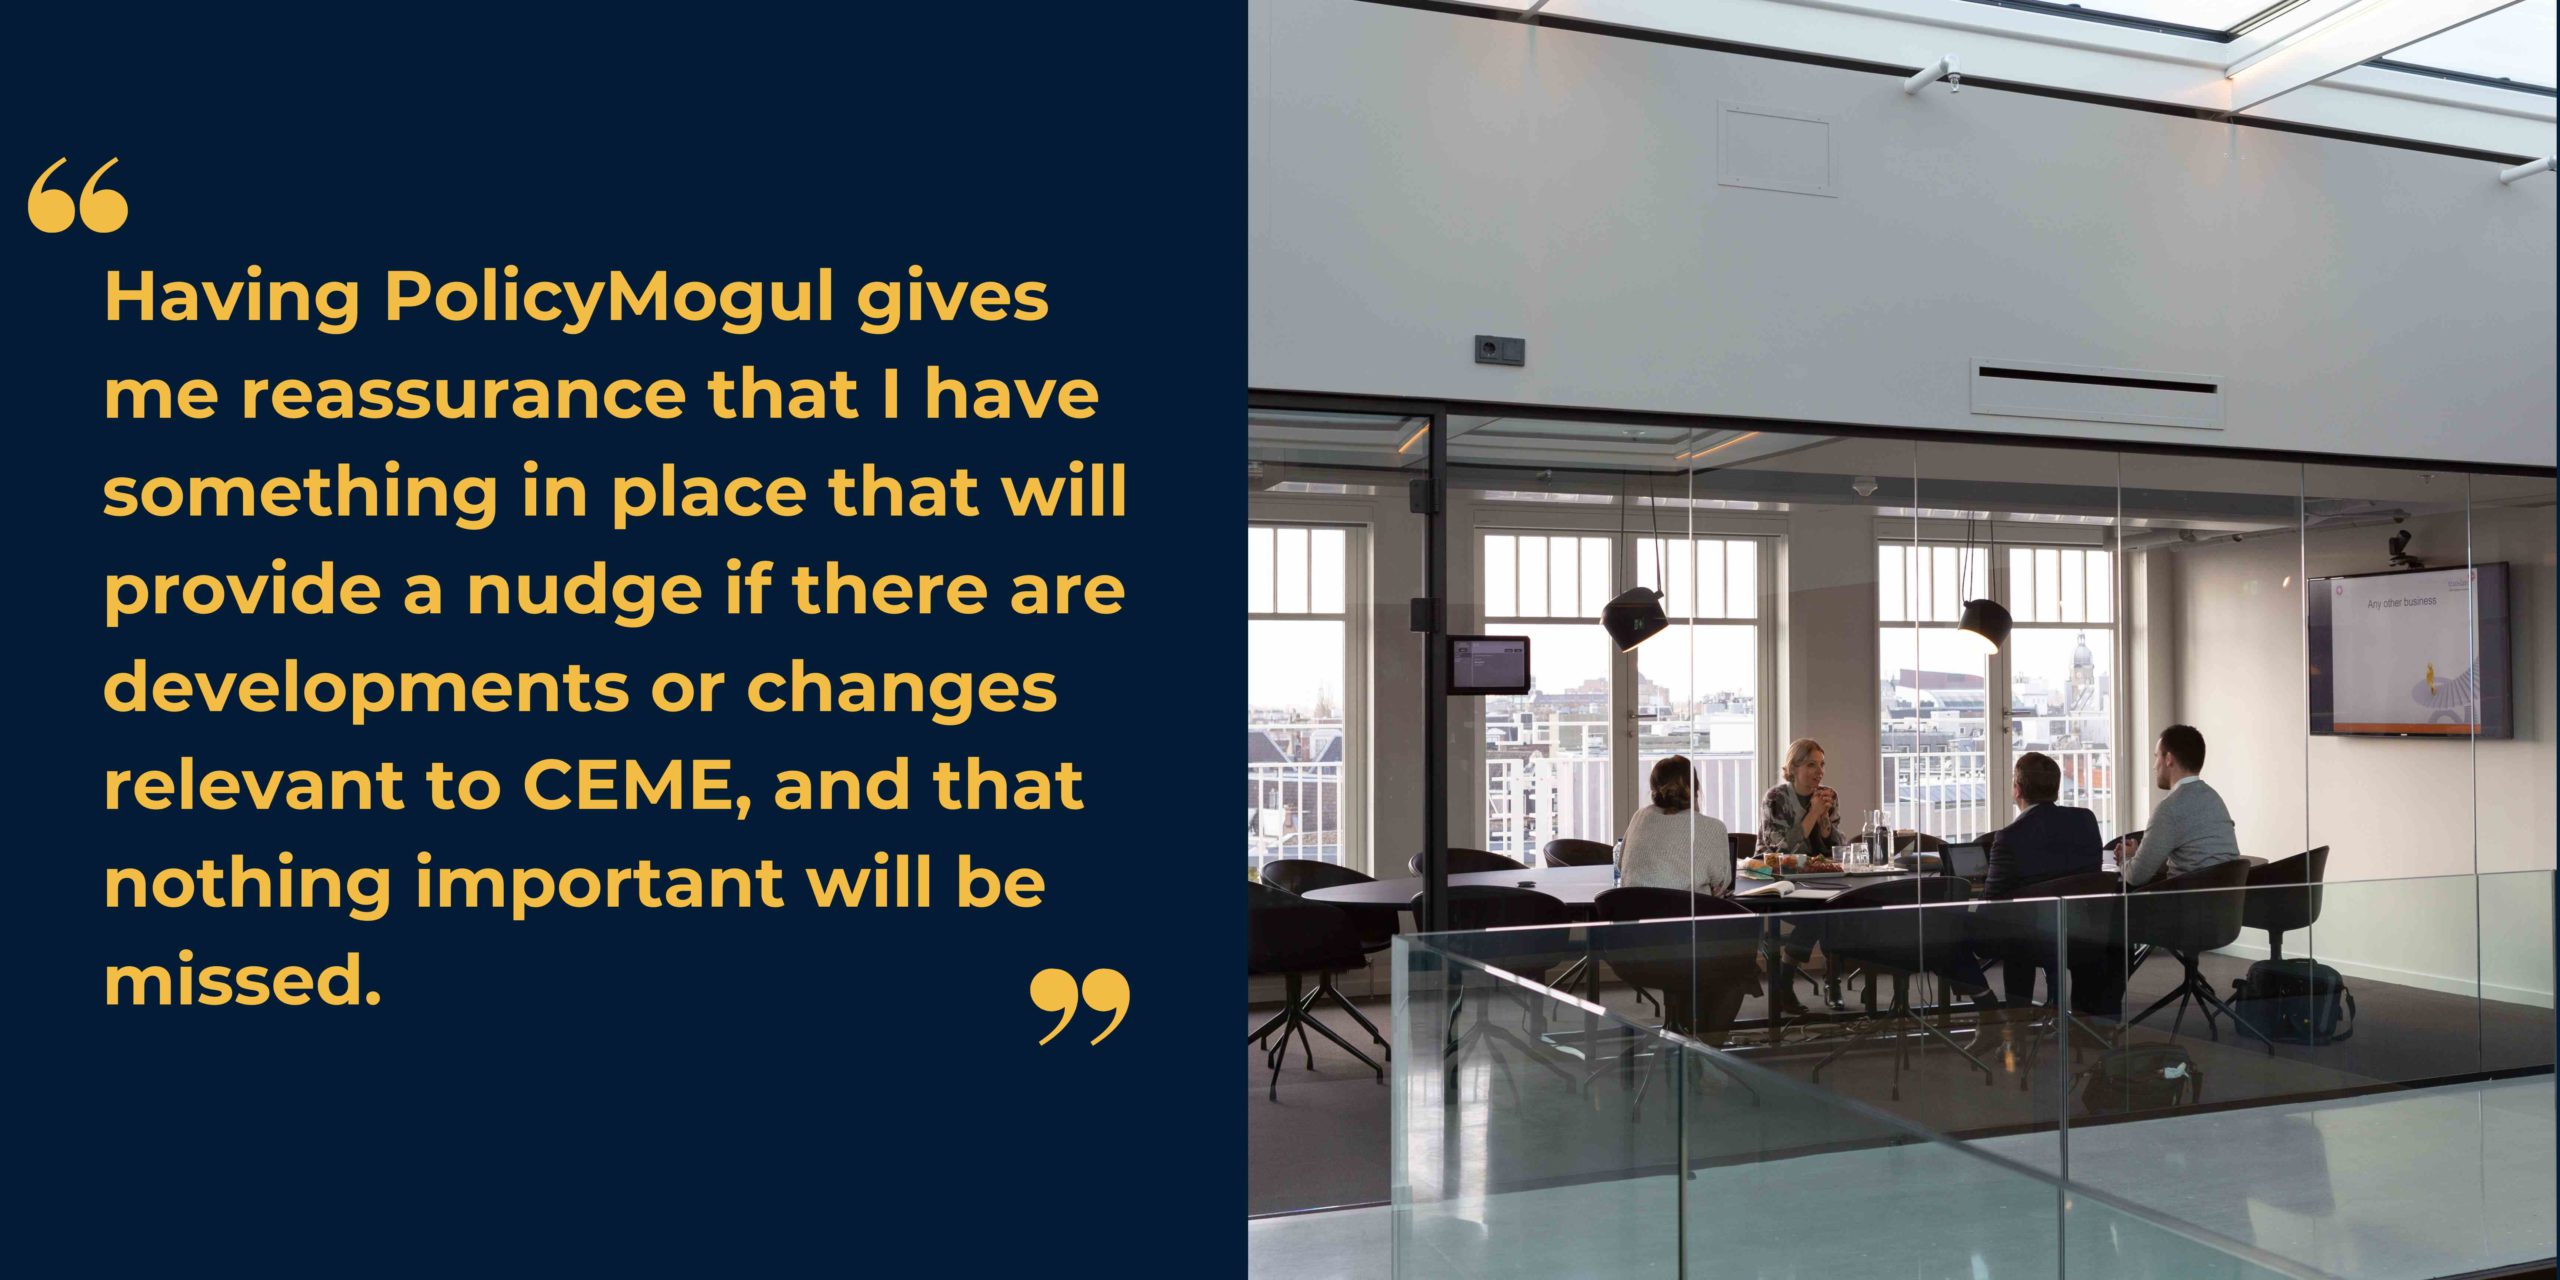 Image of four people sitting around a table in a boardroom alongside quote stating "Having PolicyMogul gives me reassurance that I have something in place that will provide a nudge if there are developments or changes relevant to CEME, and that nothing important will be missed."